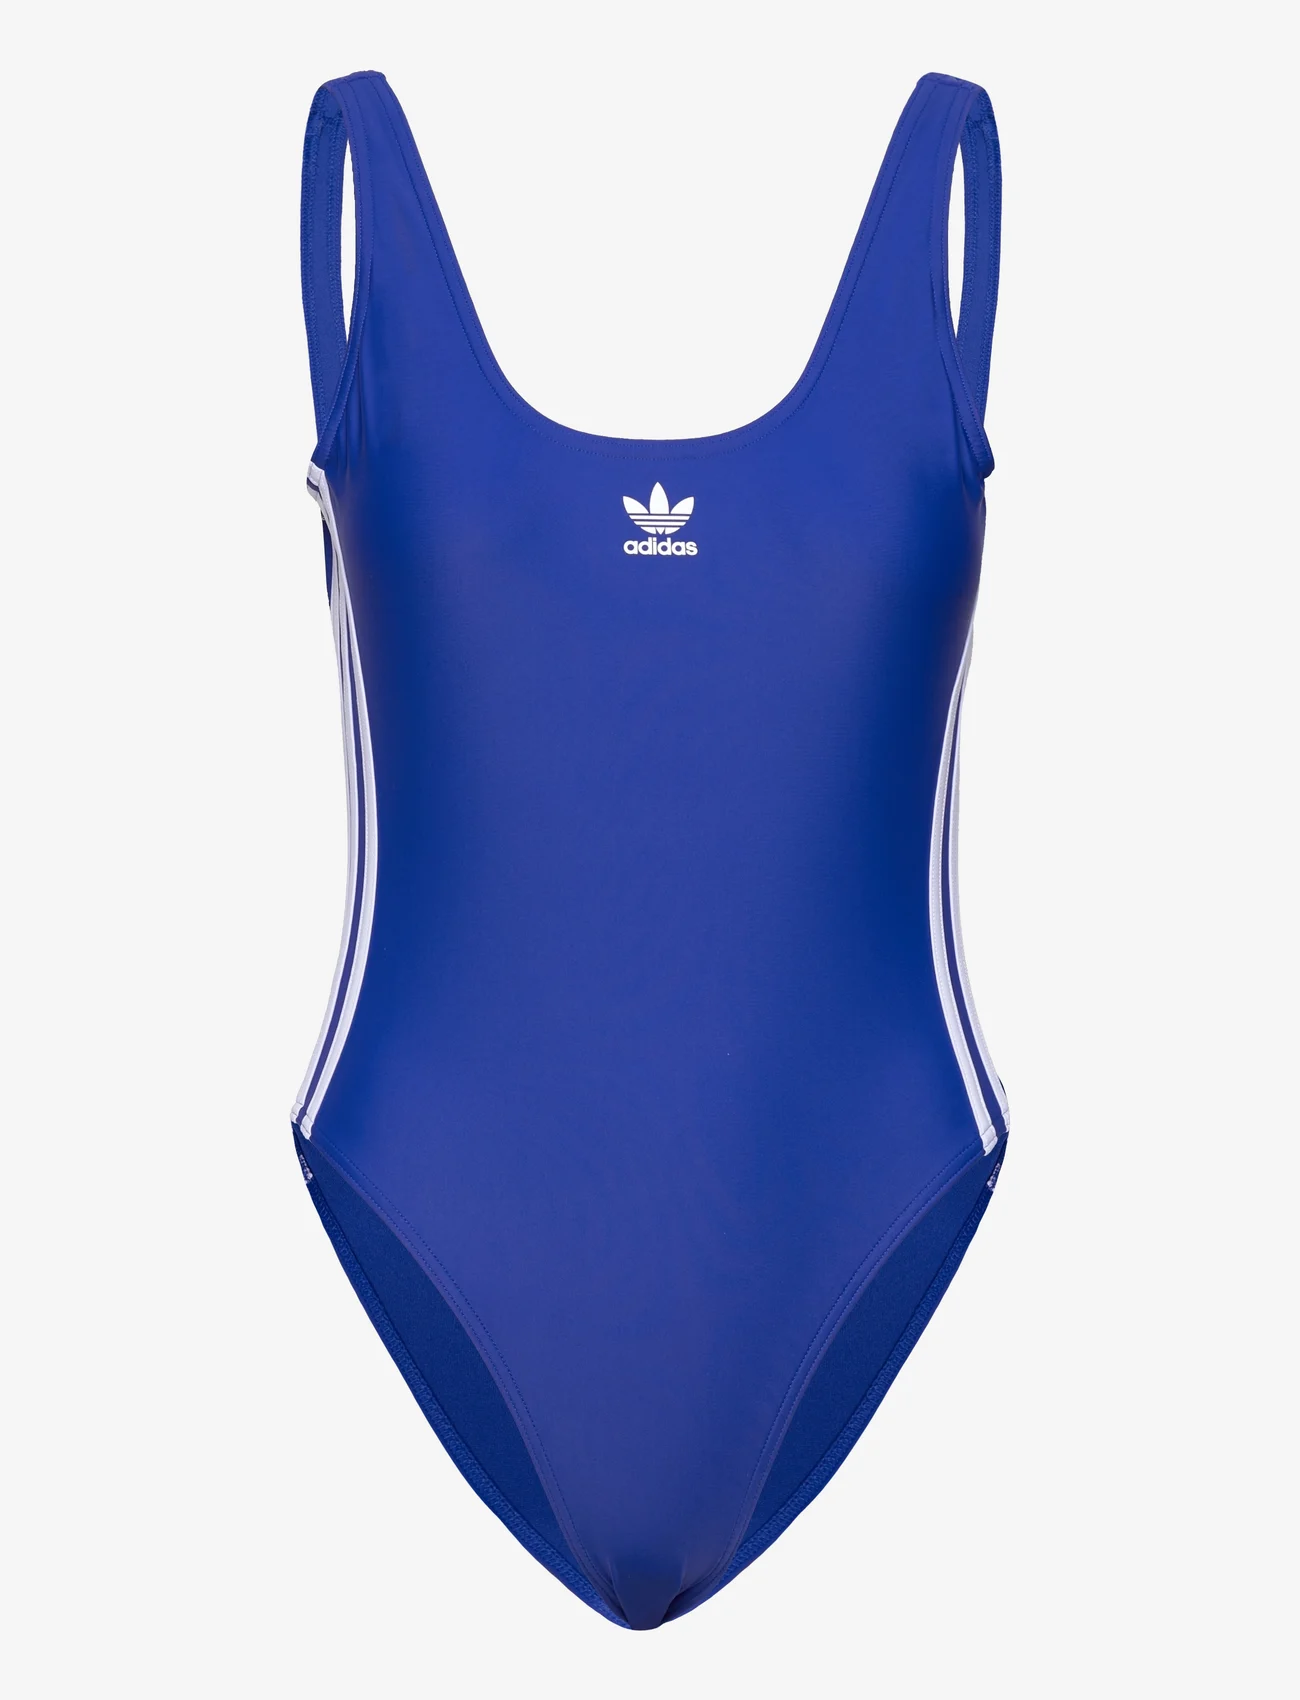 adidas Performance - ADICOL 3S SUIT - swimsuits - selubl/white - 0